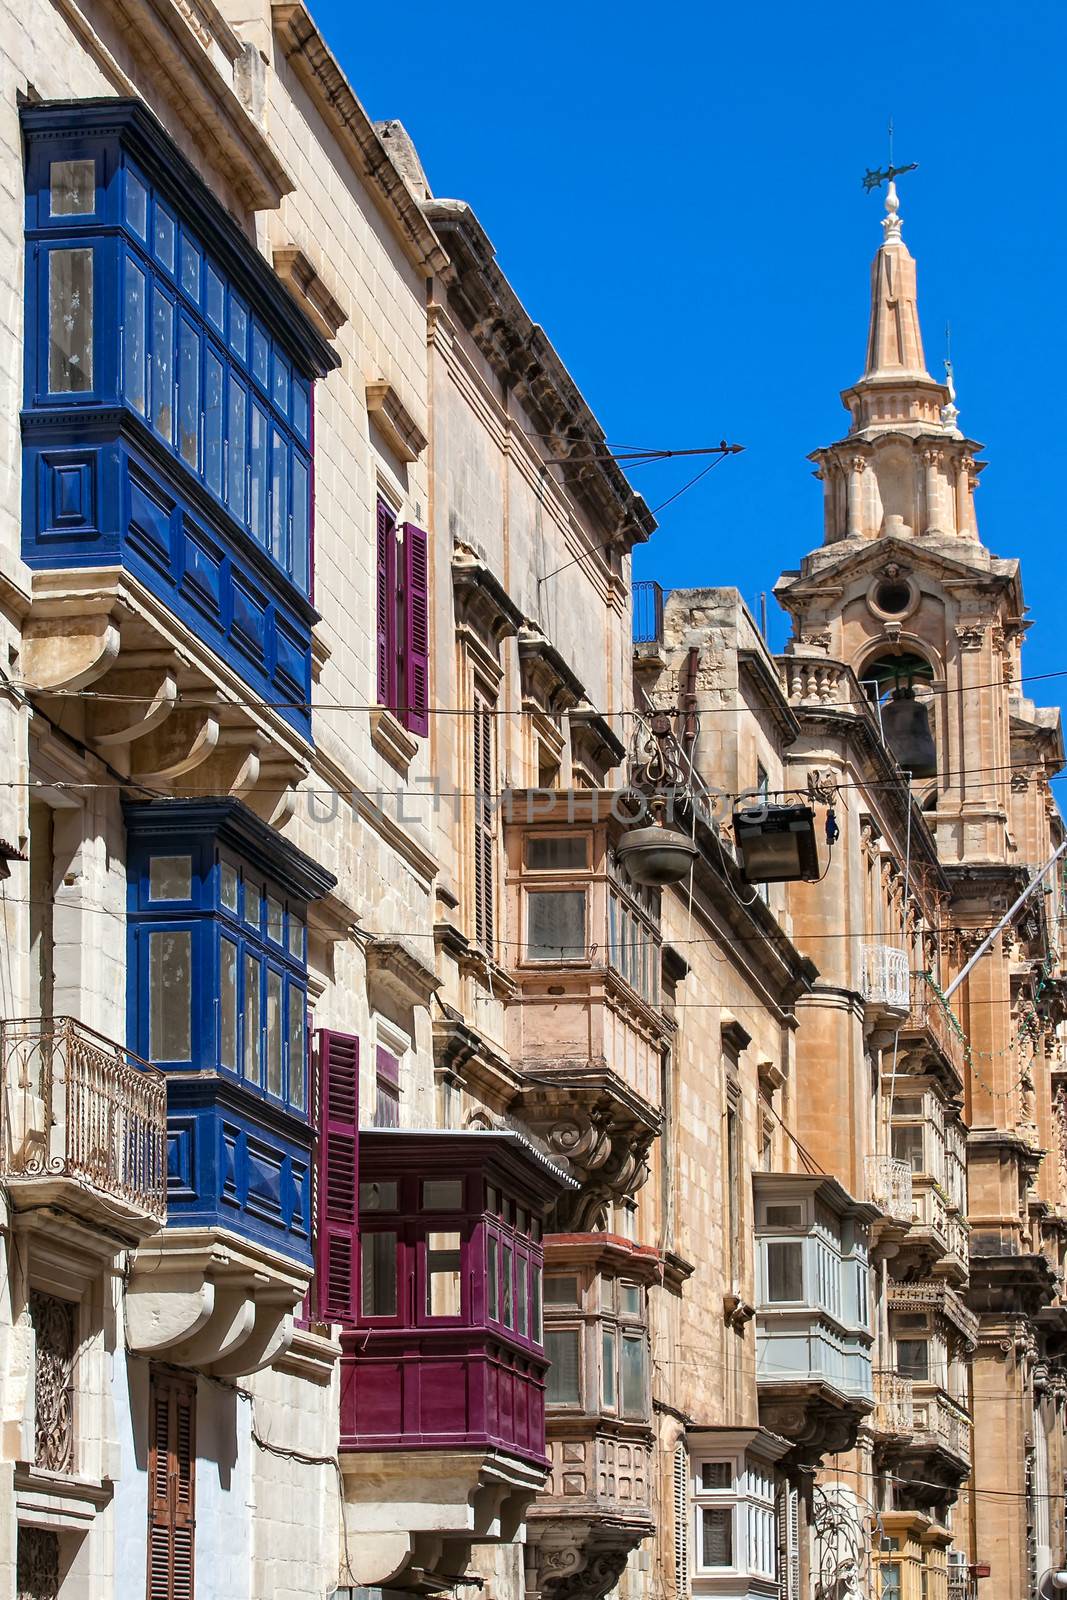 Colourful wooden balconies in one of the streets of Valletta.